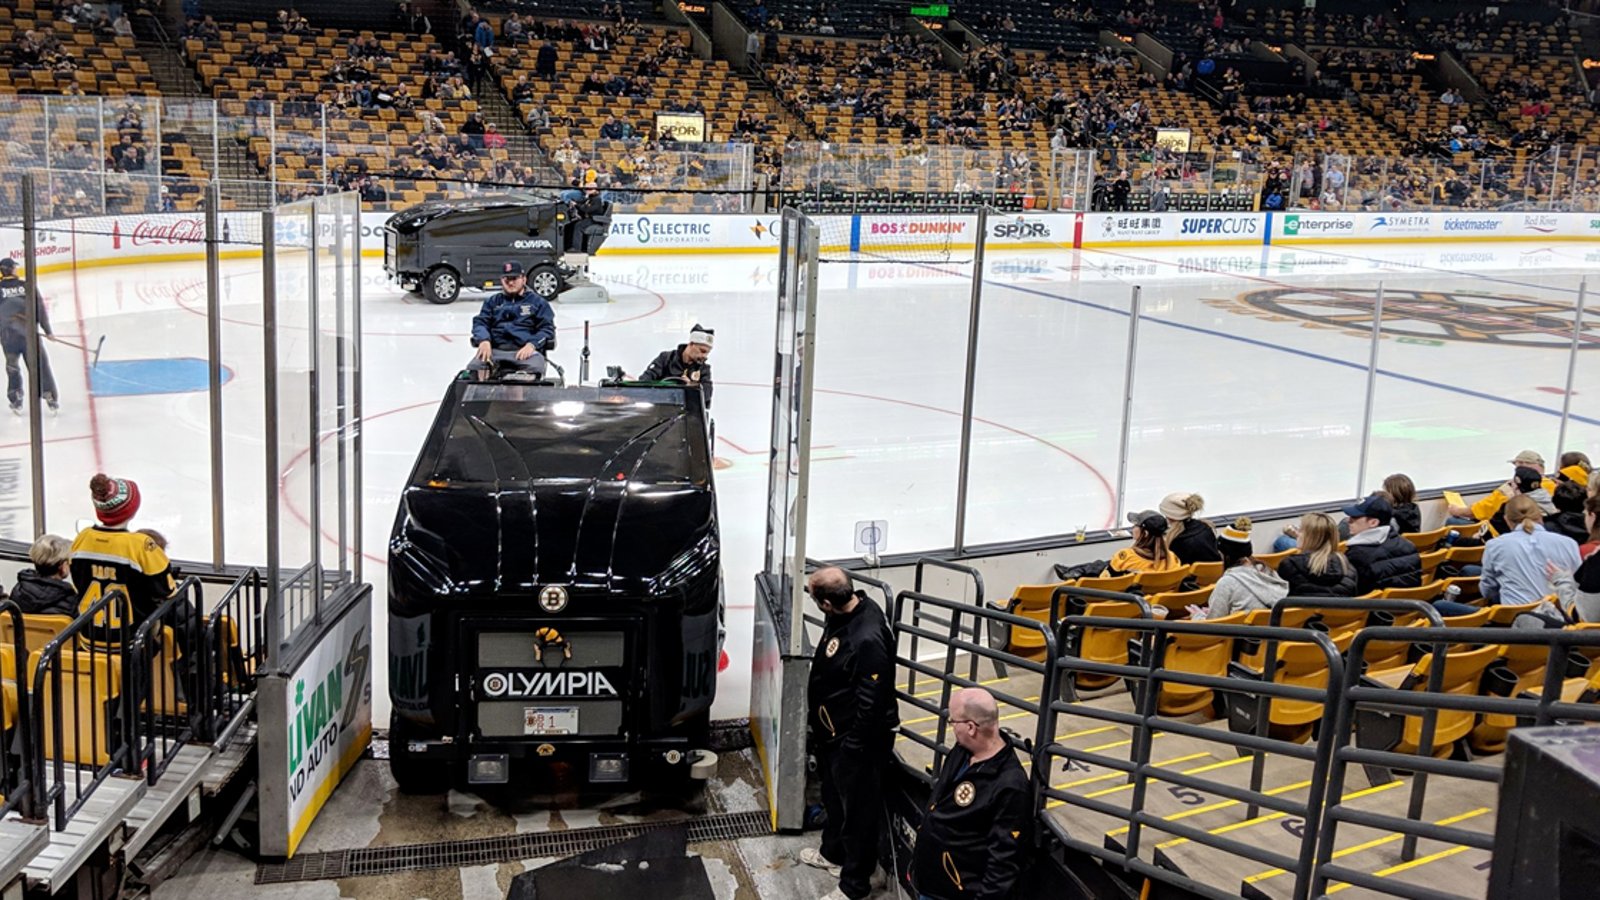 Blues GM Doug Armstrong rips into Bruins arena staff for not having ice ready for practice